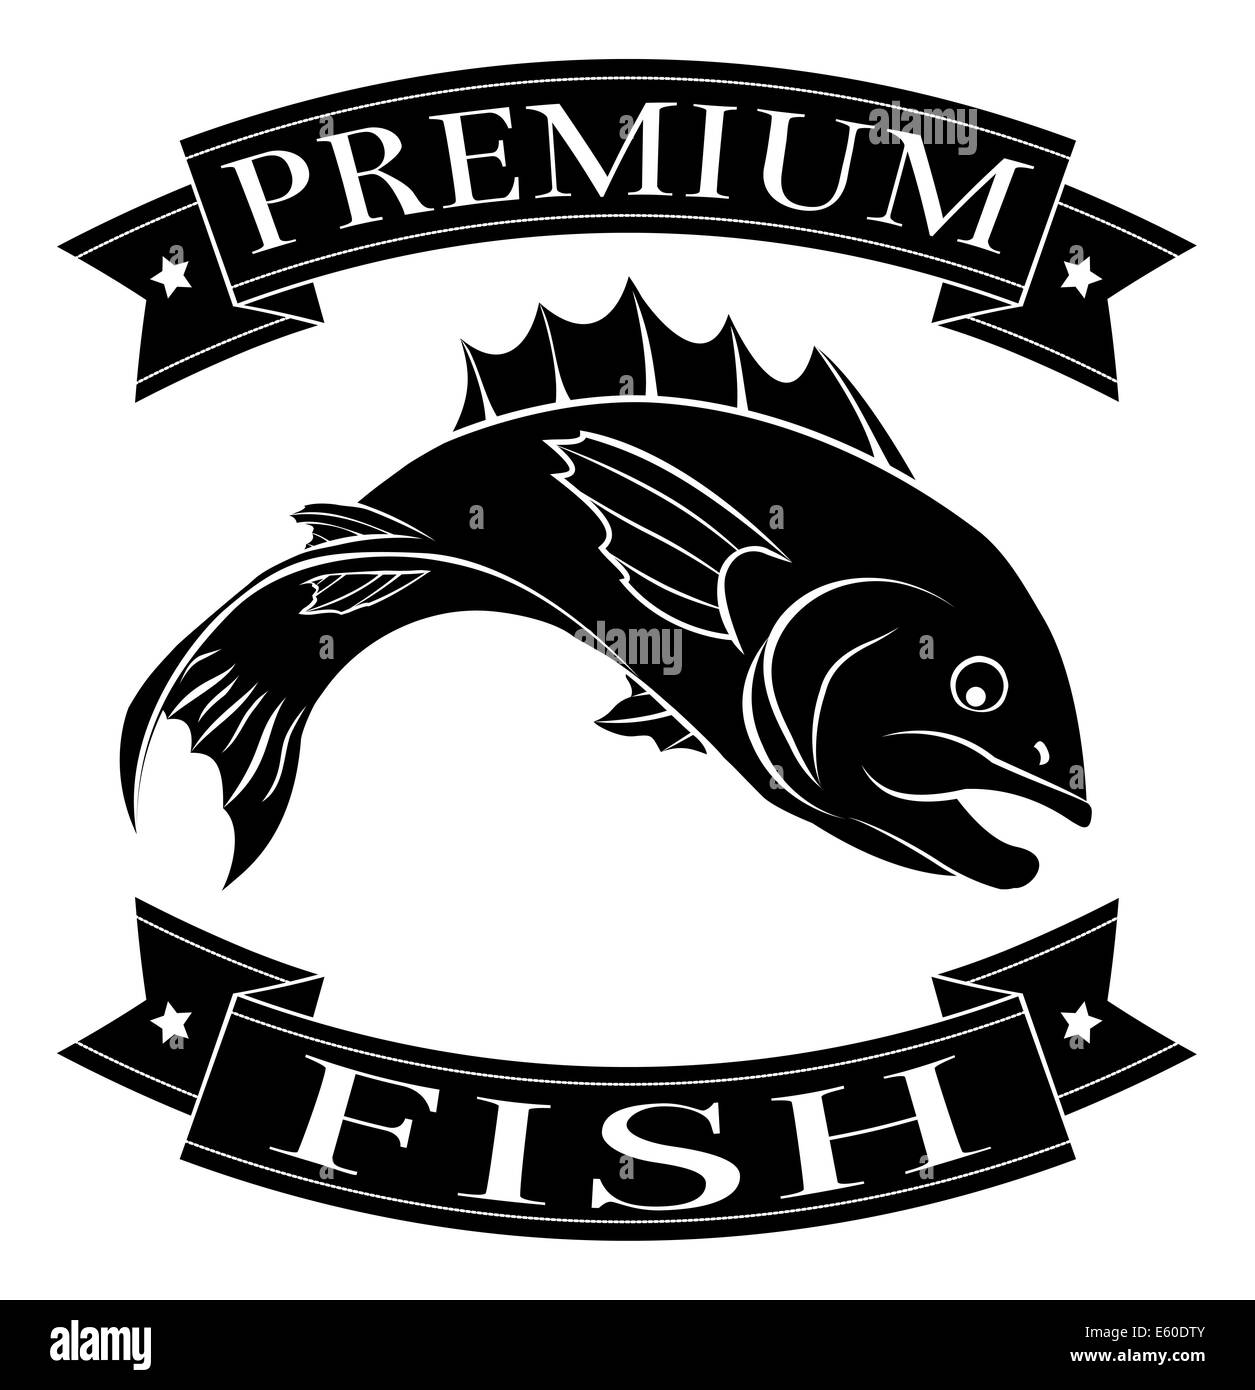 Premium fish or seafood food label featuring an illustration of a fish Stock Photo